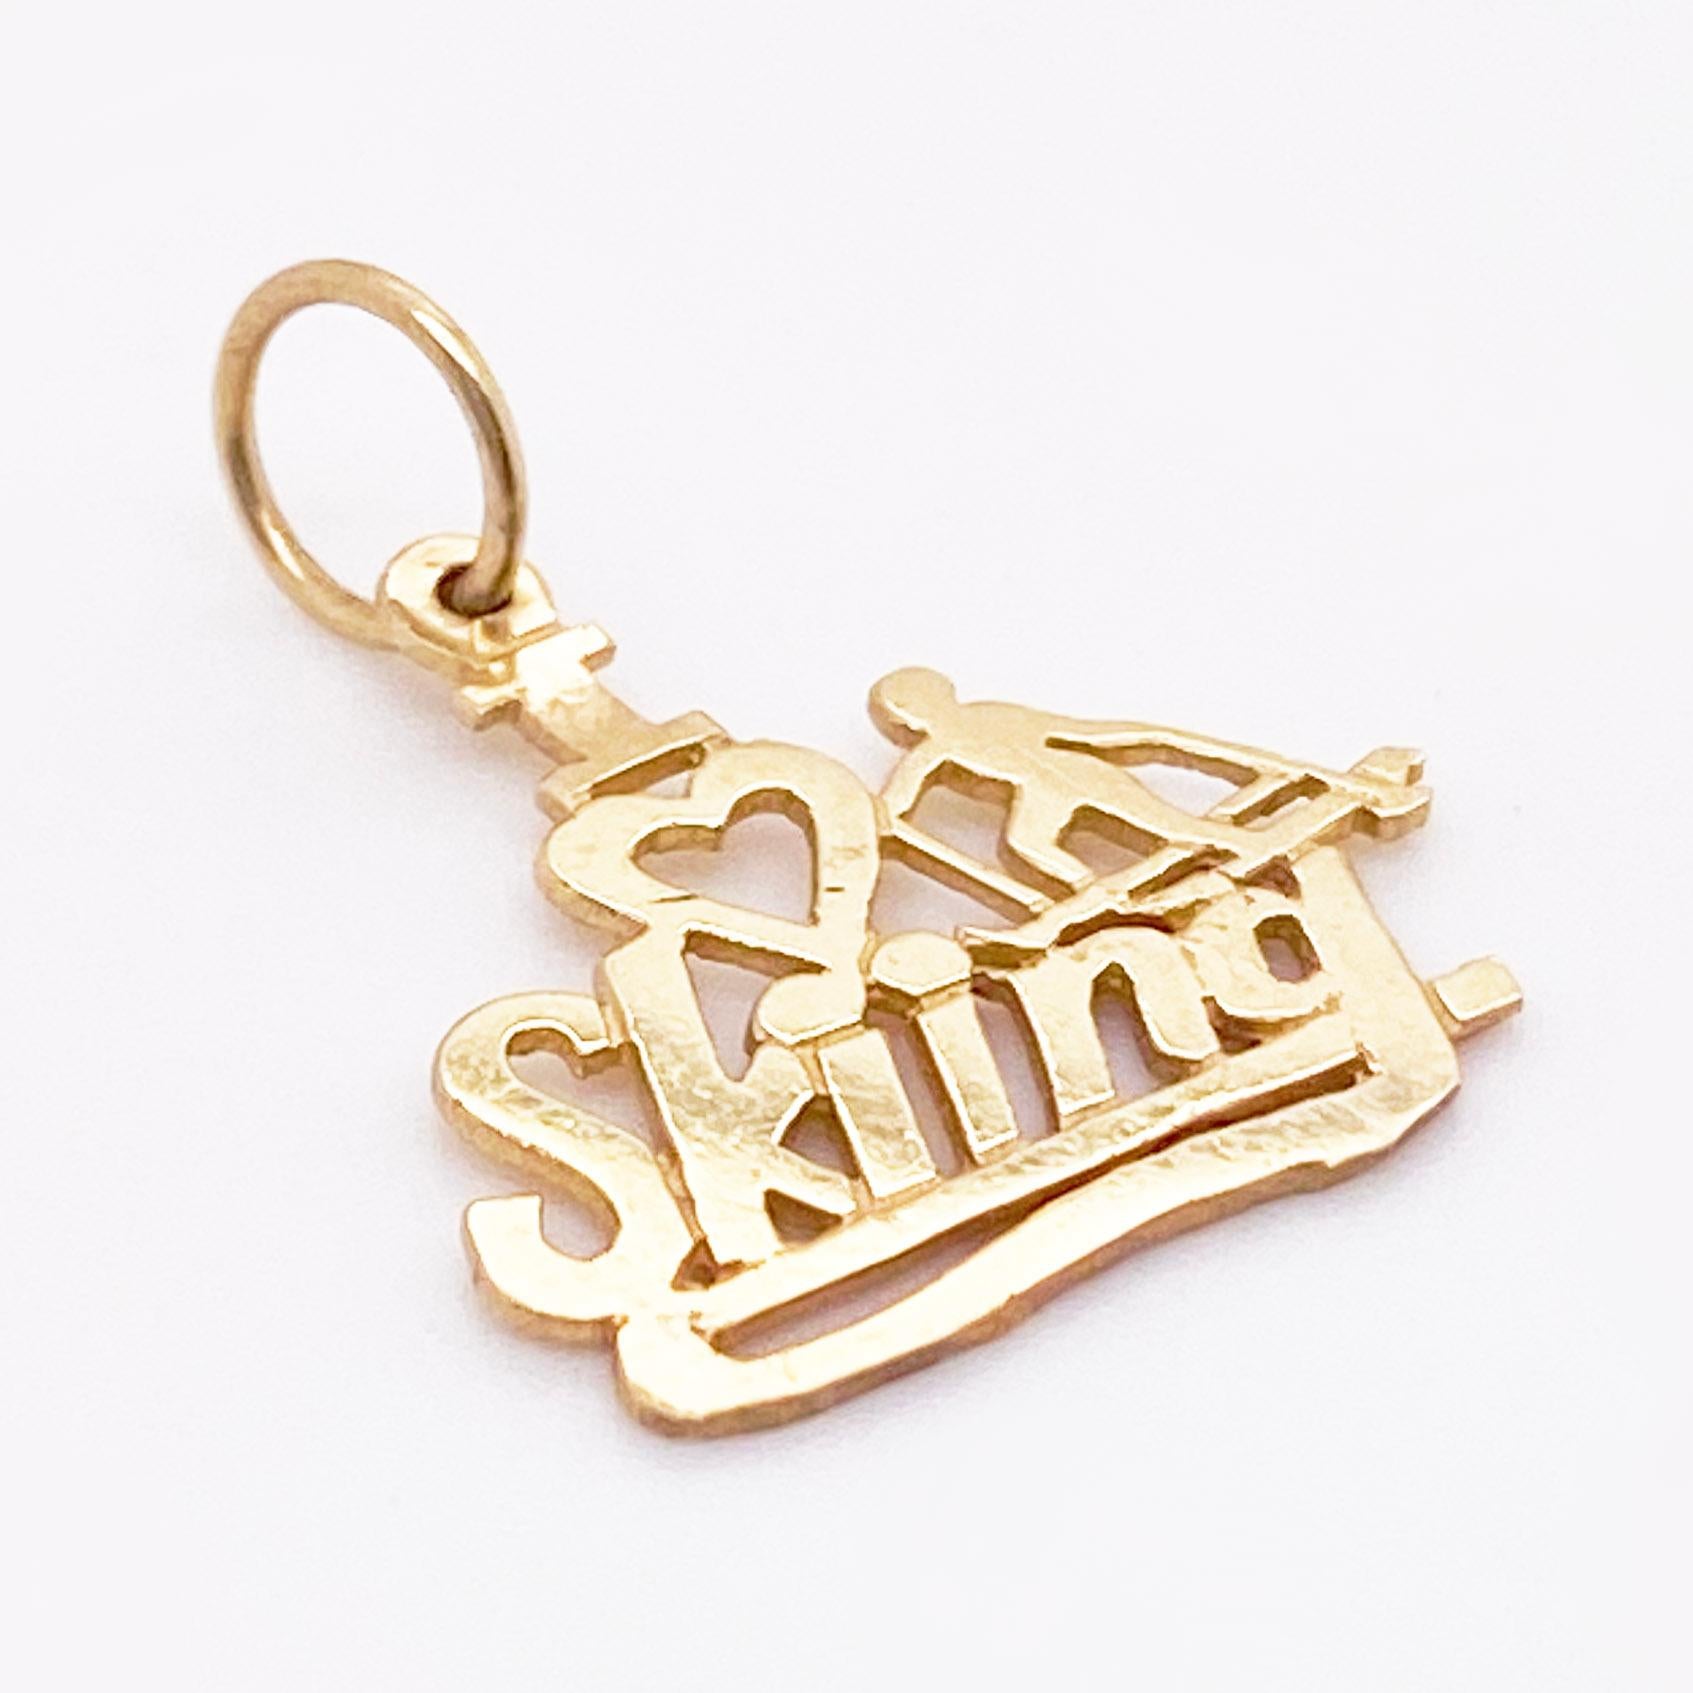 The dainty I Love Skiing Charm is perfect for any charm bracelet or as a pendant on a chain. It is stamped out to keep the price down.
Metal Quality: 14K Yellow Gold
Charm Style: Skiing Heart Charm
Charm Measurements: 17.2 x 17.7 millimeters
*chain